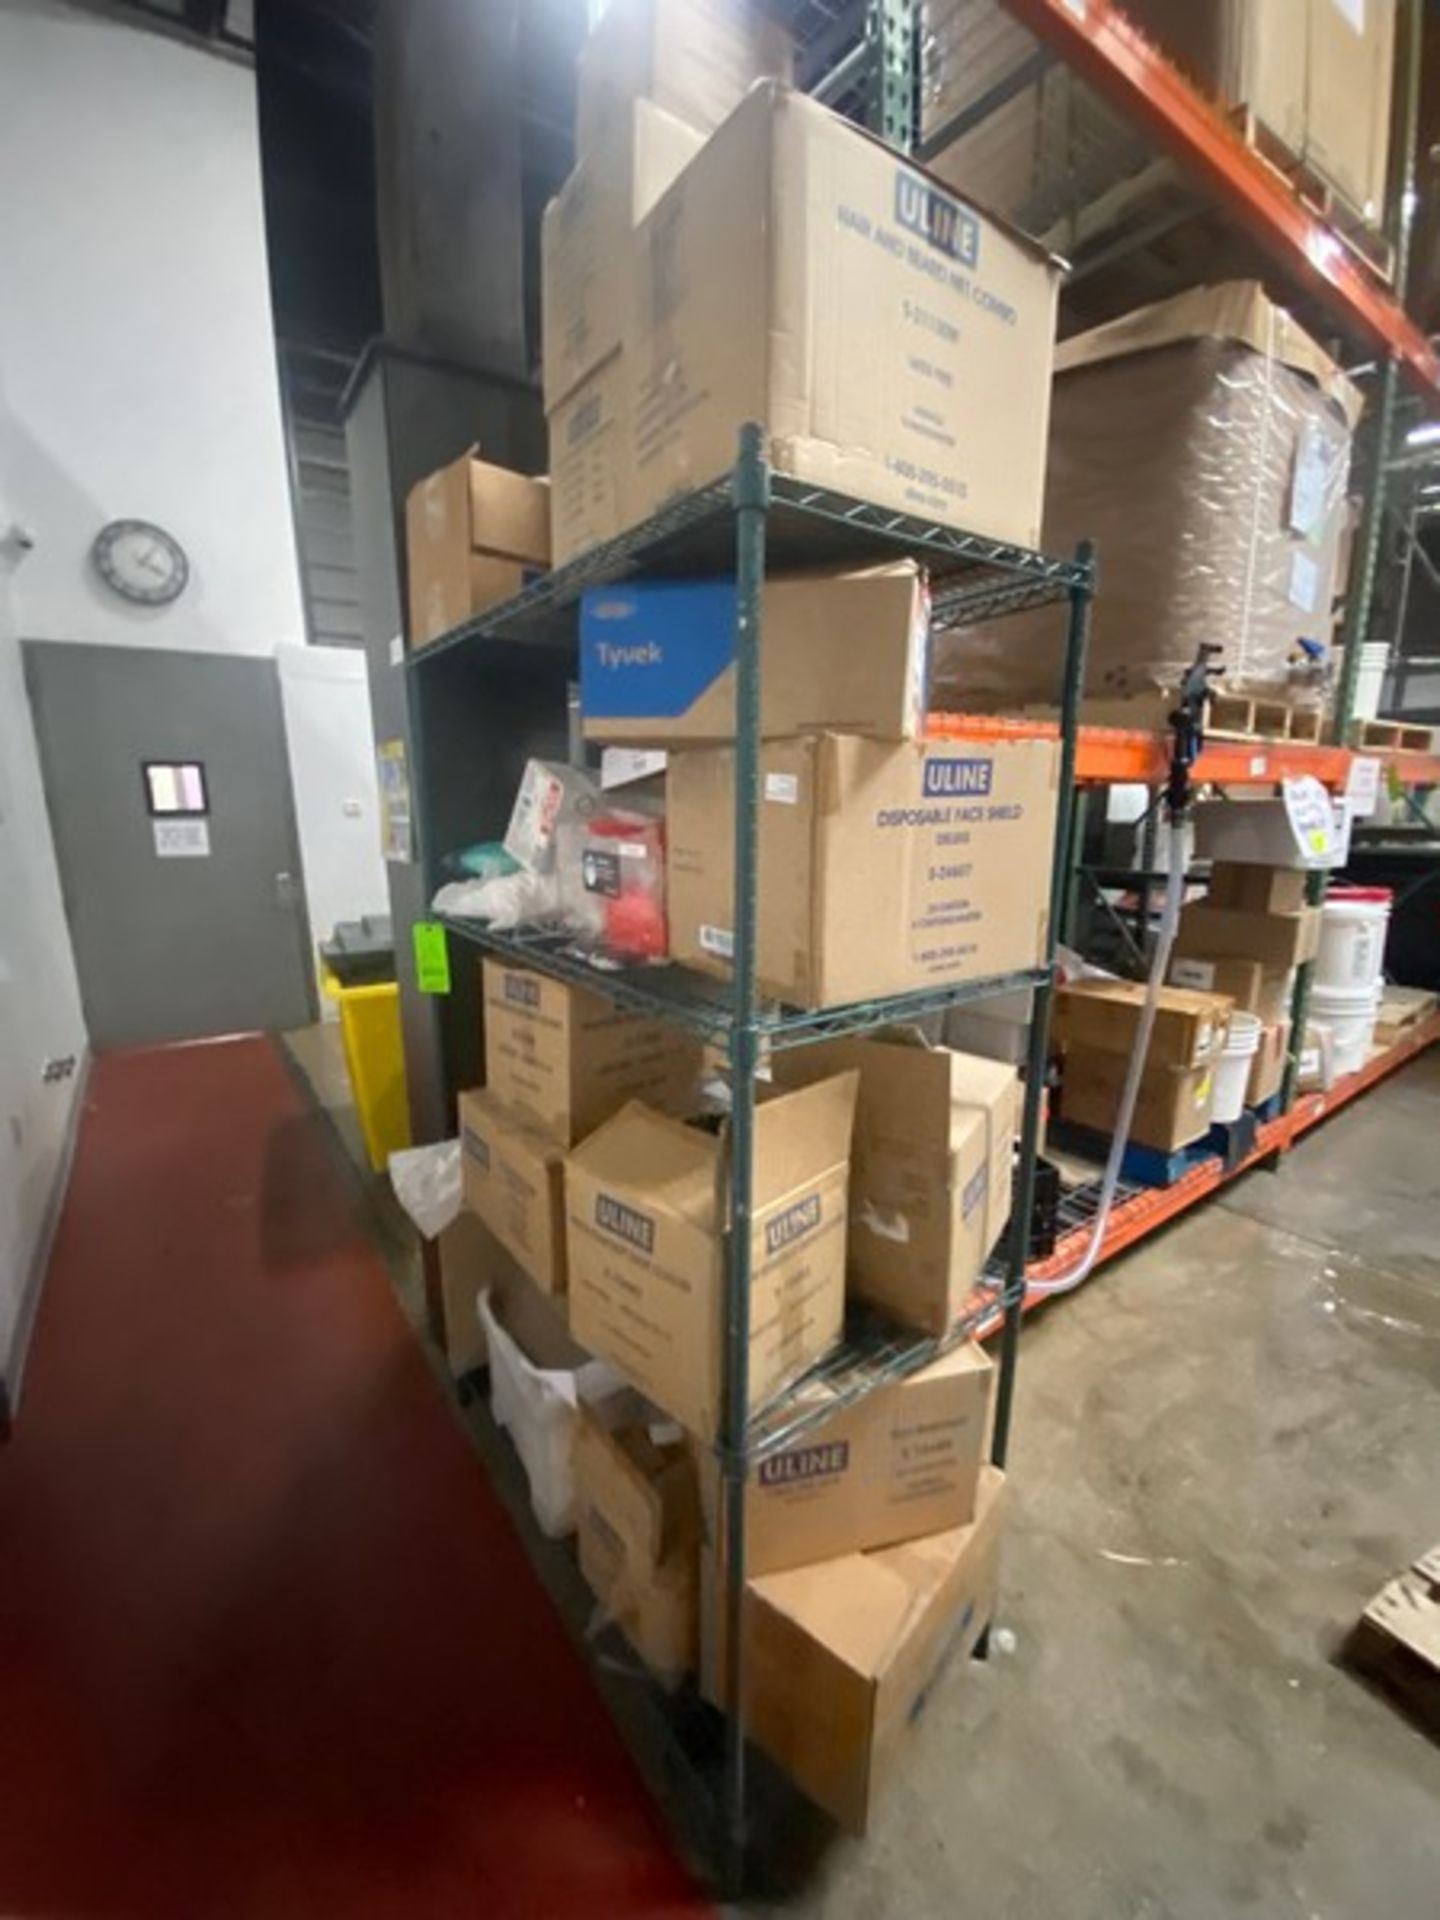 Shelving Unit with Contents Includes Uline Supplies (LOCATED IN RED HOOK BROOKLYN, N.Y.)